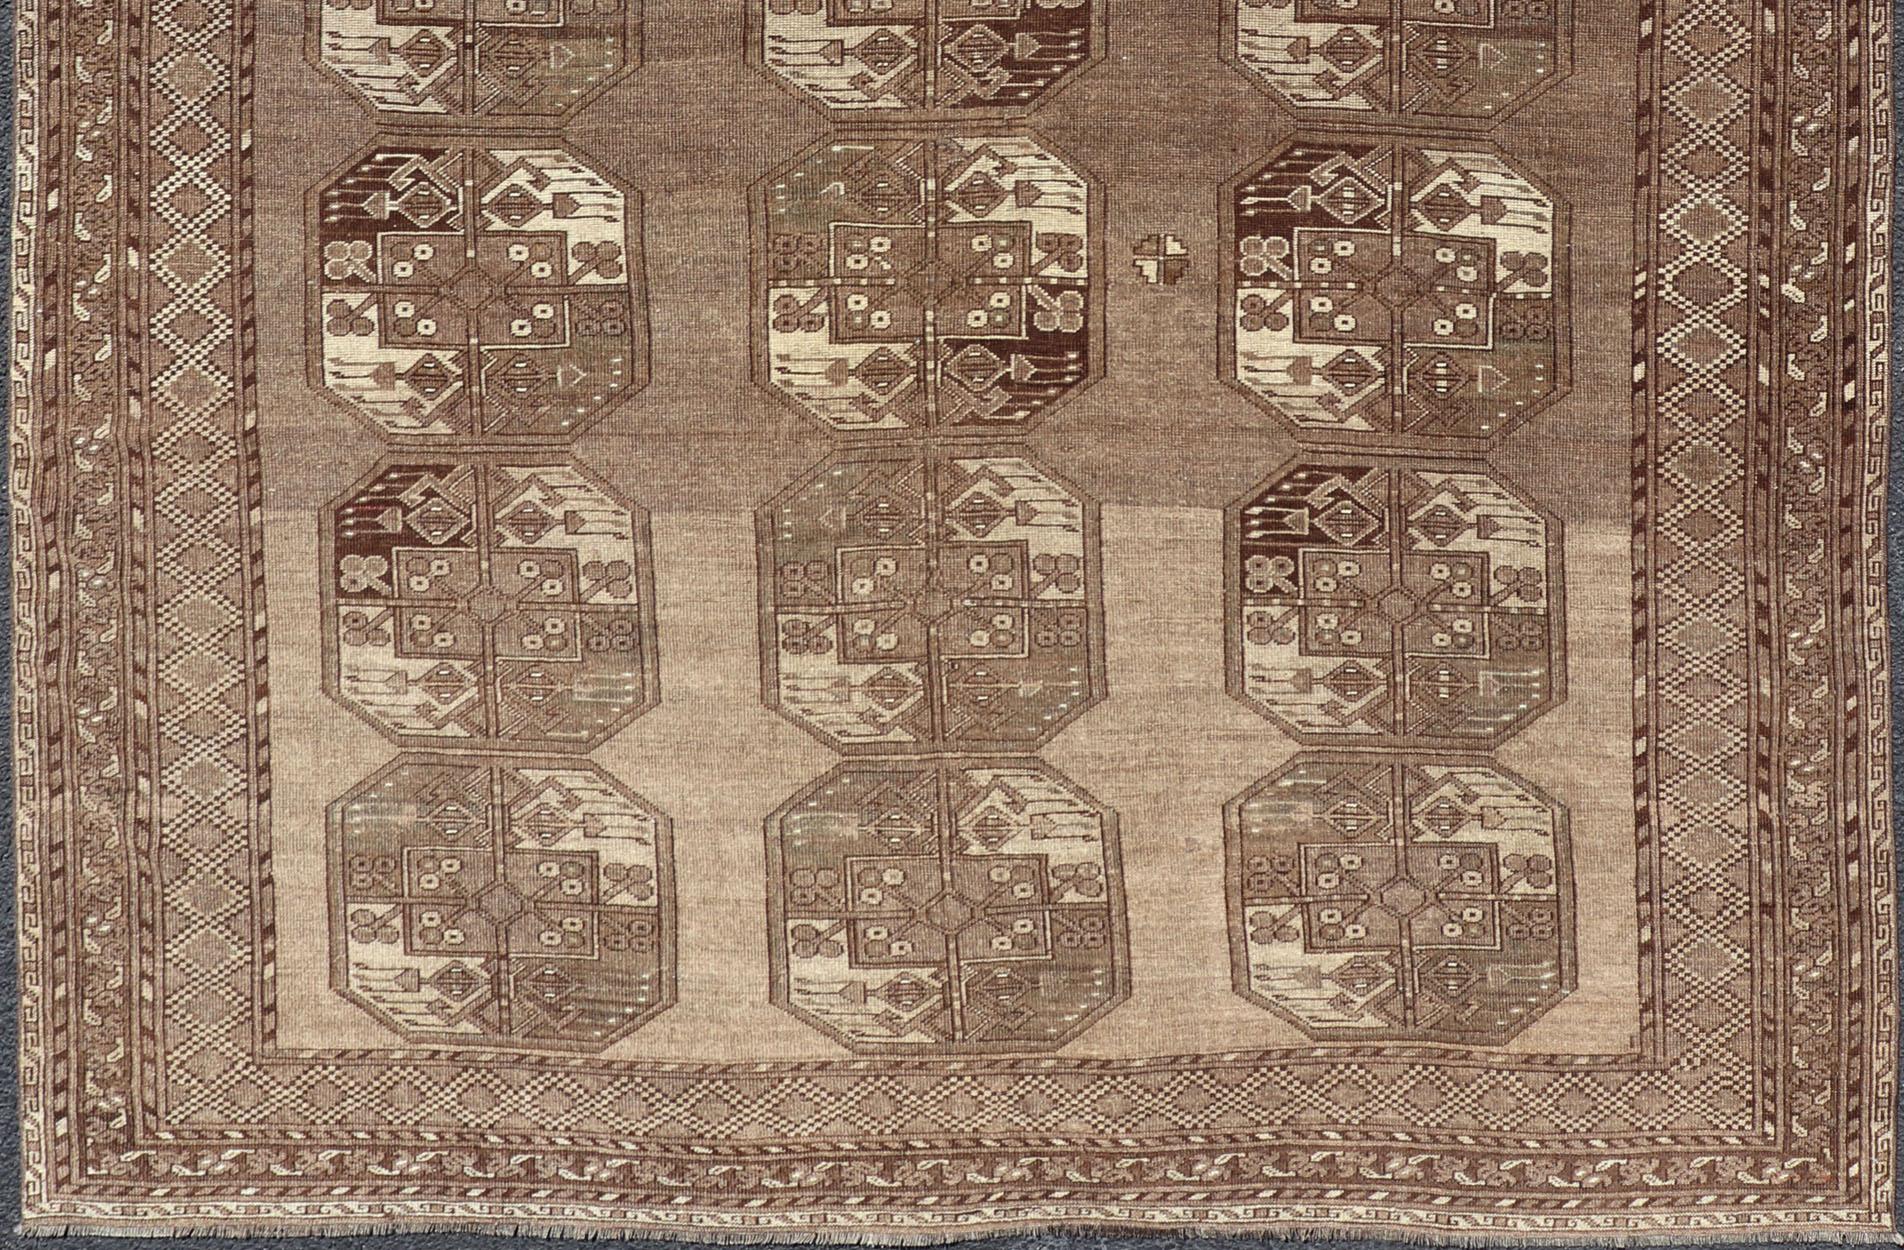 This Ersari rug has been hand-knotted in the finest wool. The rug features a sub-geometric repeating Gul design throughout the entirety of the rug, enclosed within a complementary, multi-tiered border, rendered in small repeating motifs. The rug is